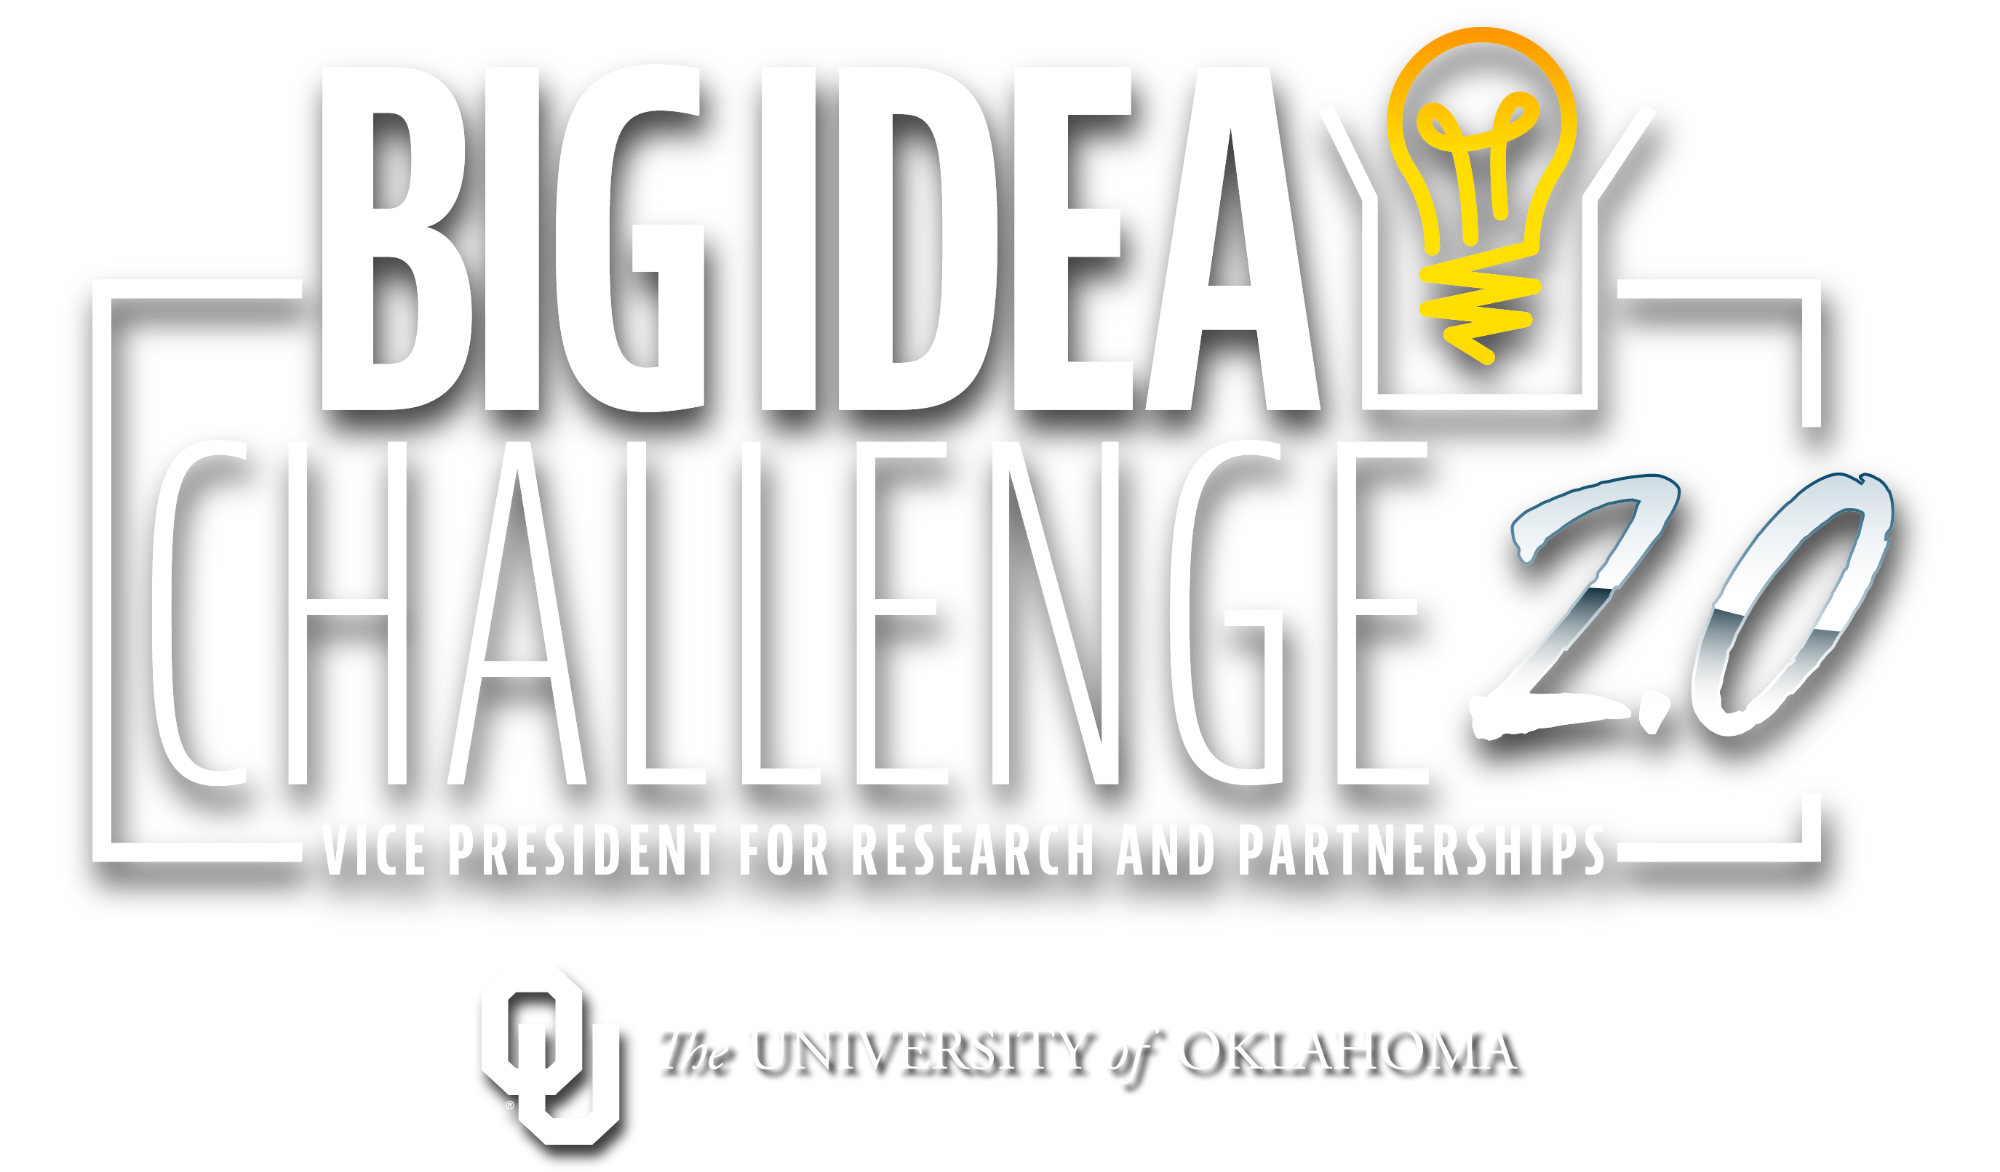 Big Idea Challenge 2.0, Vice President for Research and Partnerships at the University of Oklahoma.